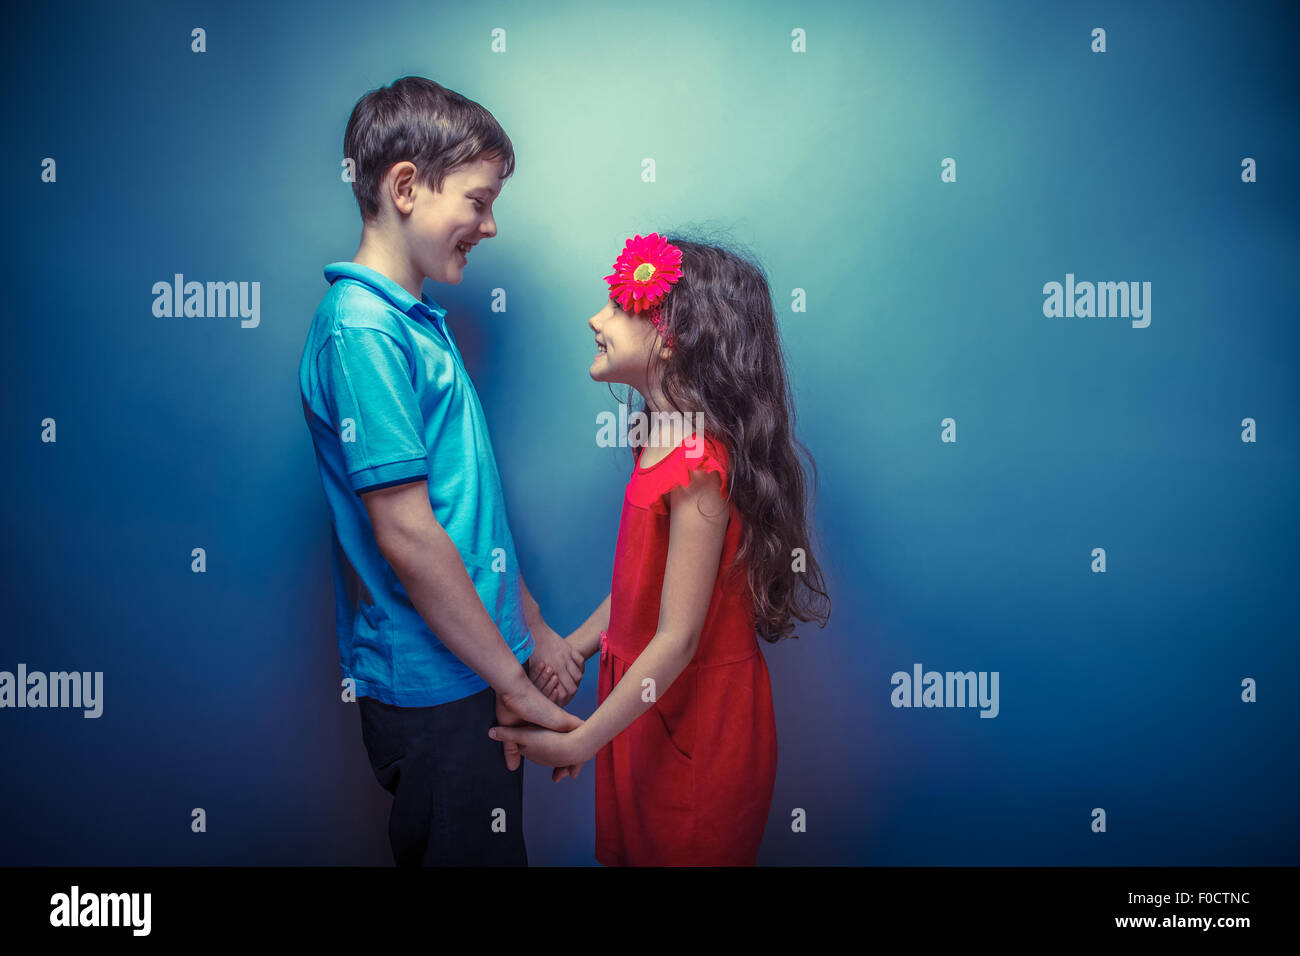 teen girl holding hands teenage boy on a gray background retro photo effect Stock Photo